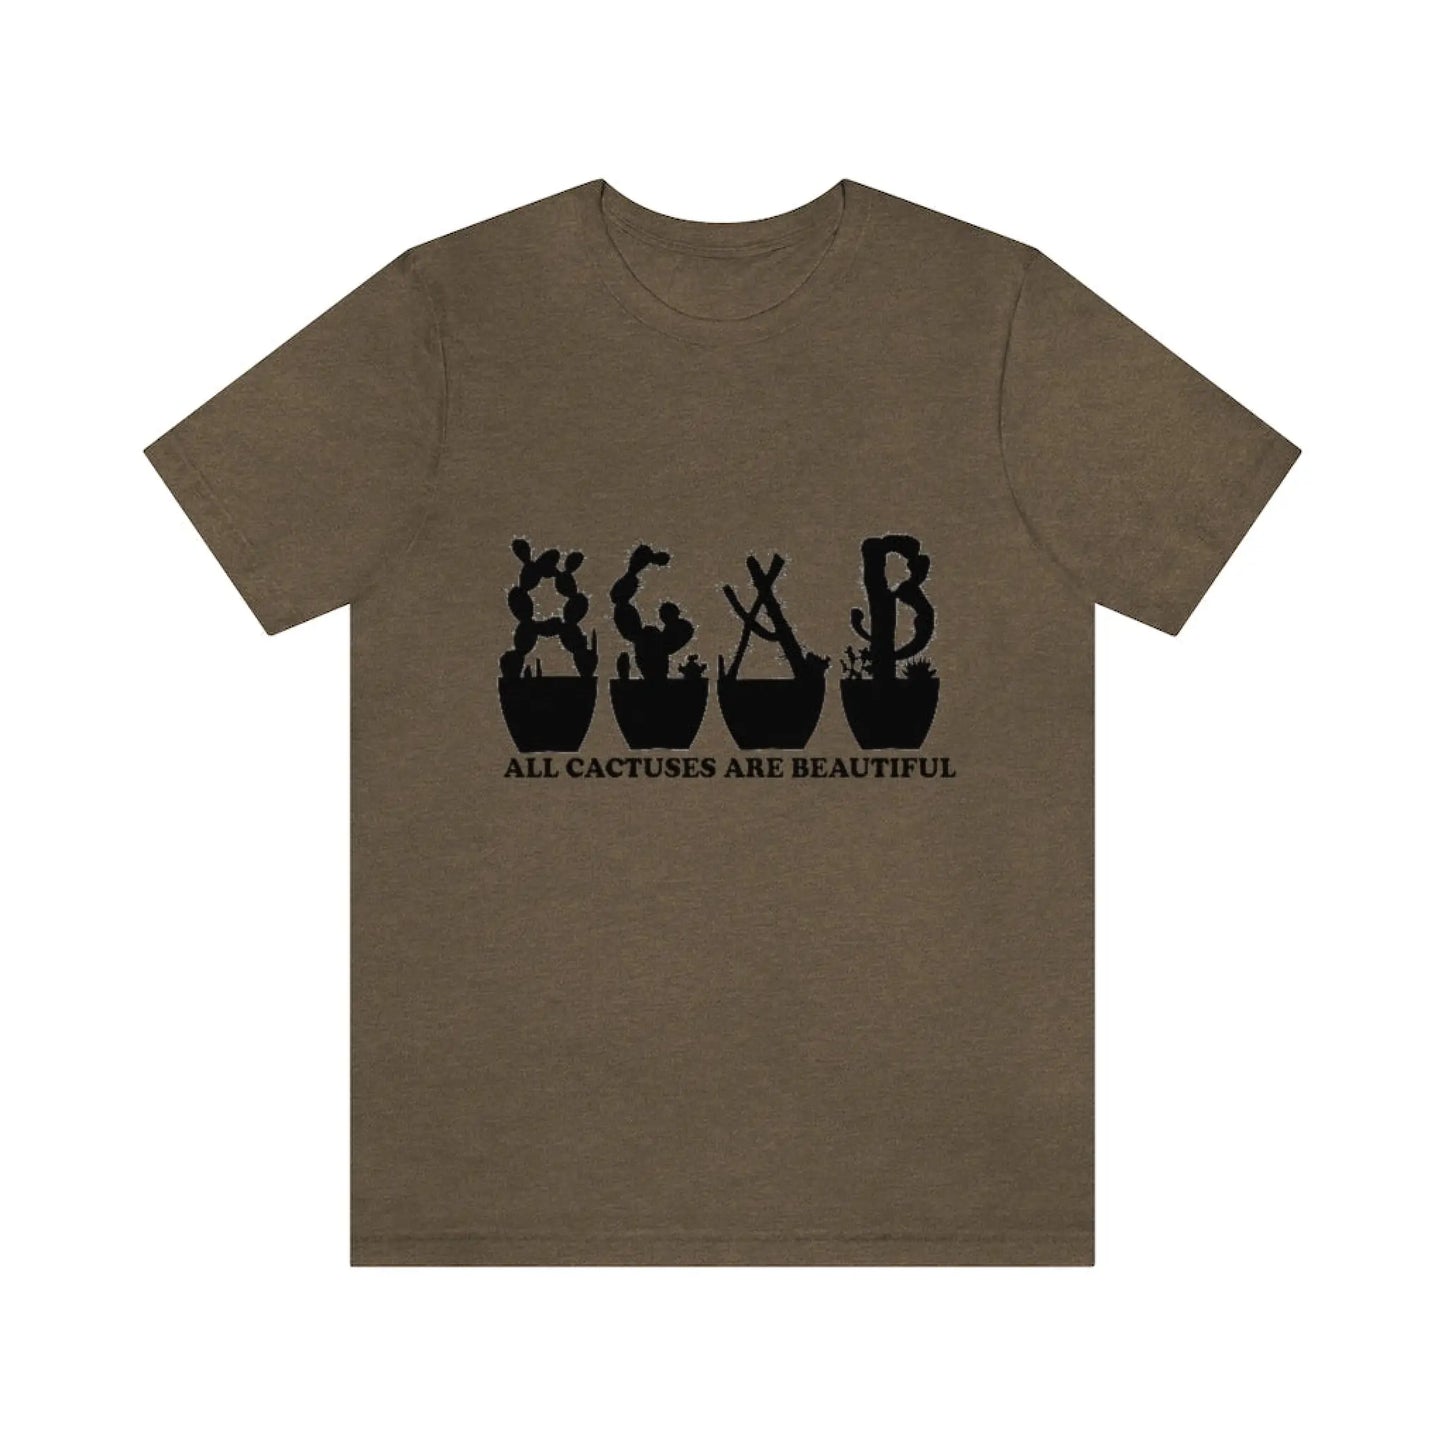 Shirts - All Cactuses Are Beautiful - Heather Olive / S -